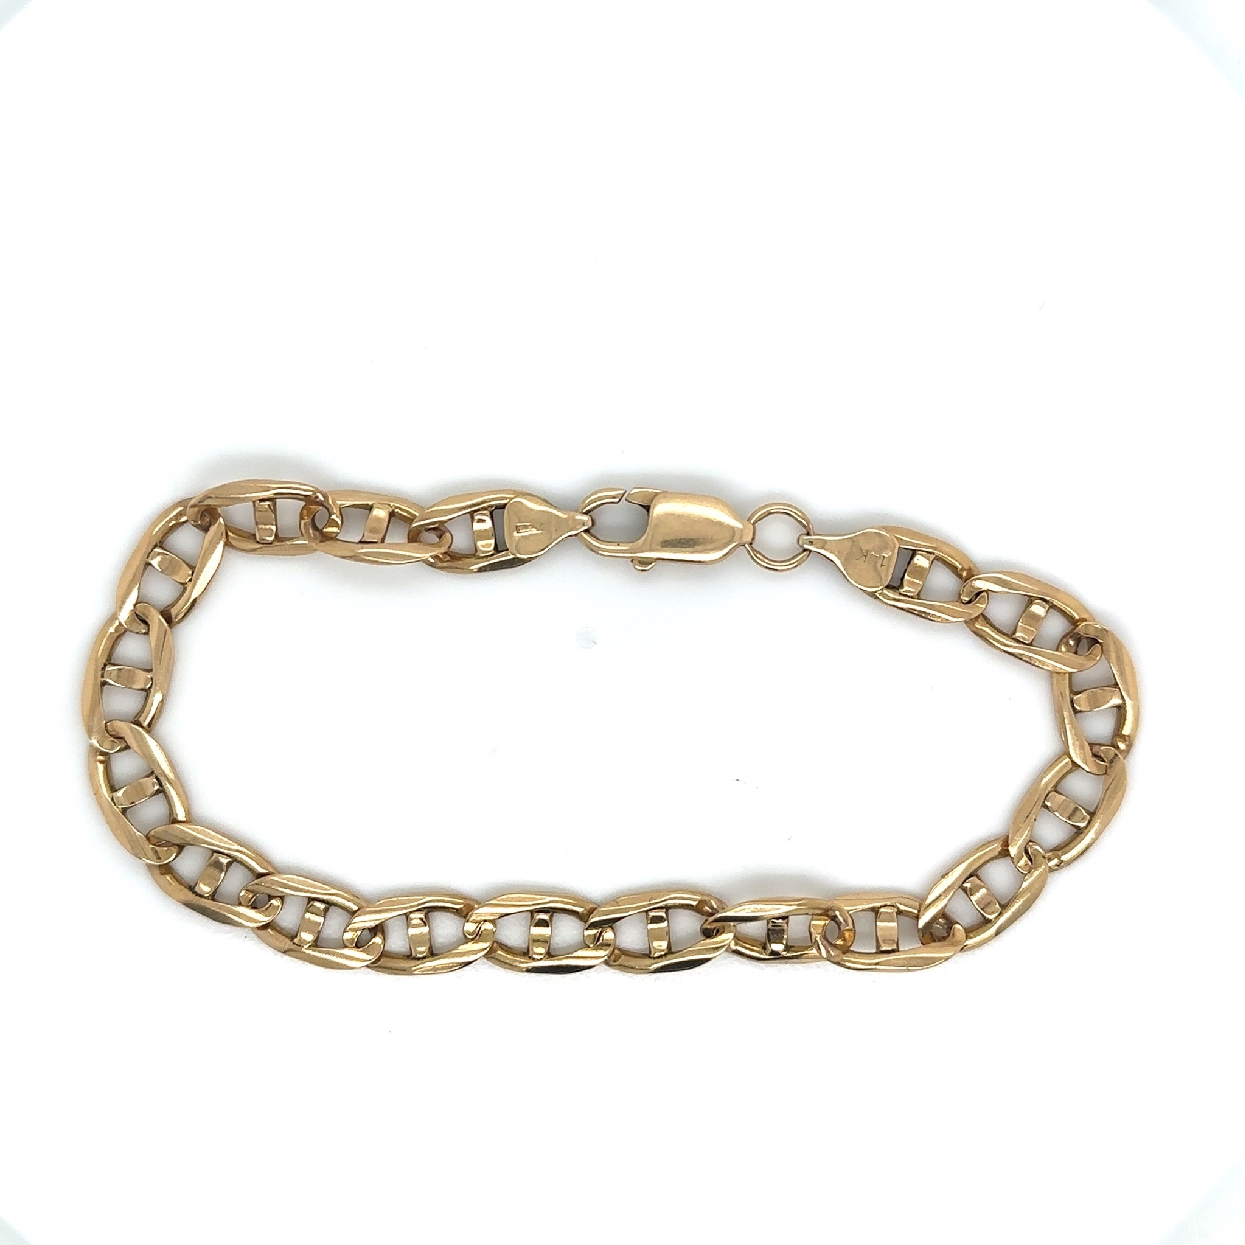 14K Yellow Gold Mariner Link Bracelet

8 Inches